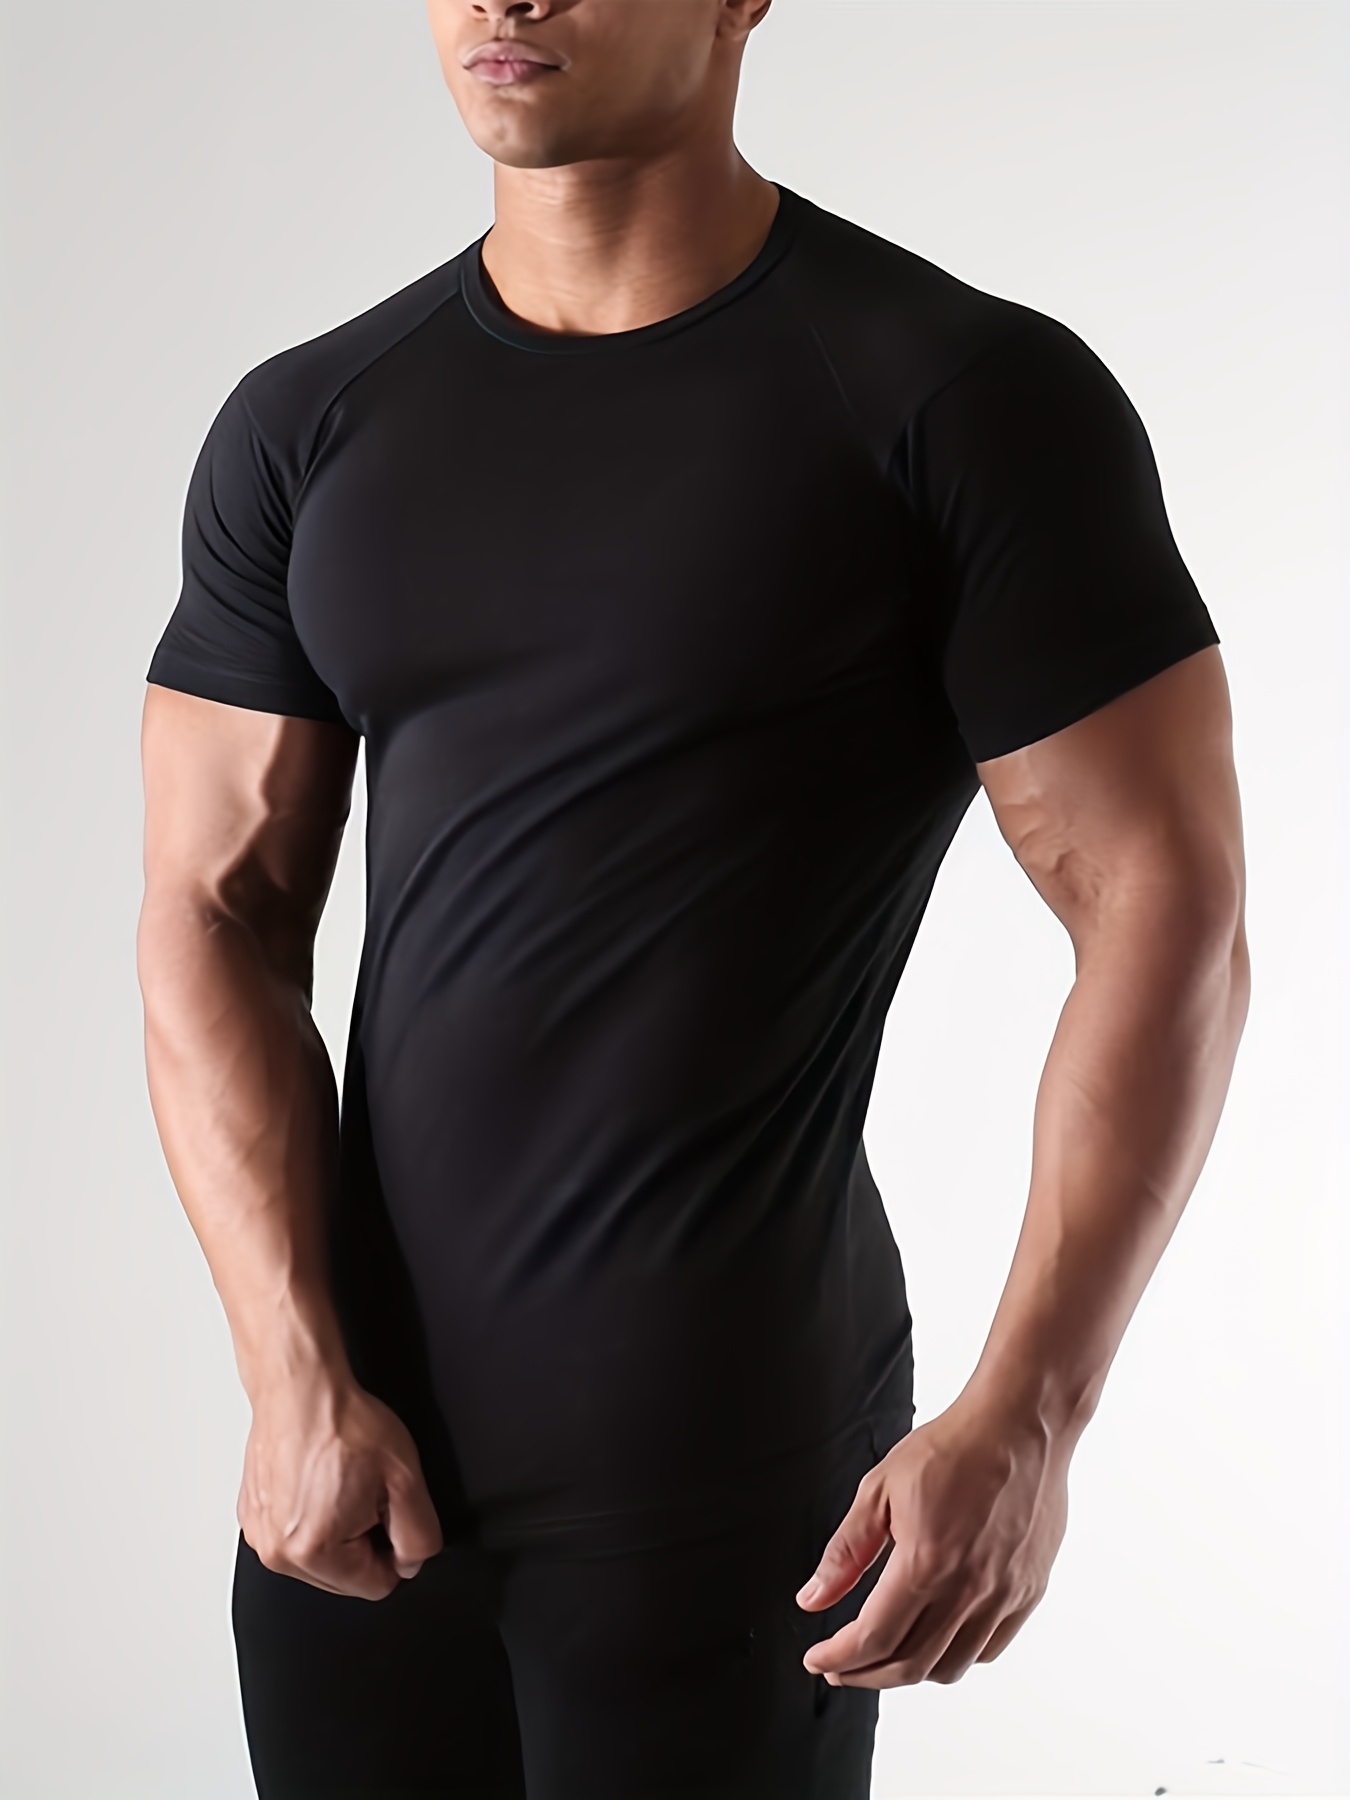 Men Muscle T-shirt Workout Gym Sports Training Quick Dry Tee Shirt Short  Sleeve Slim Fit Tops